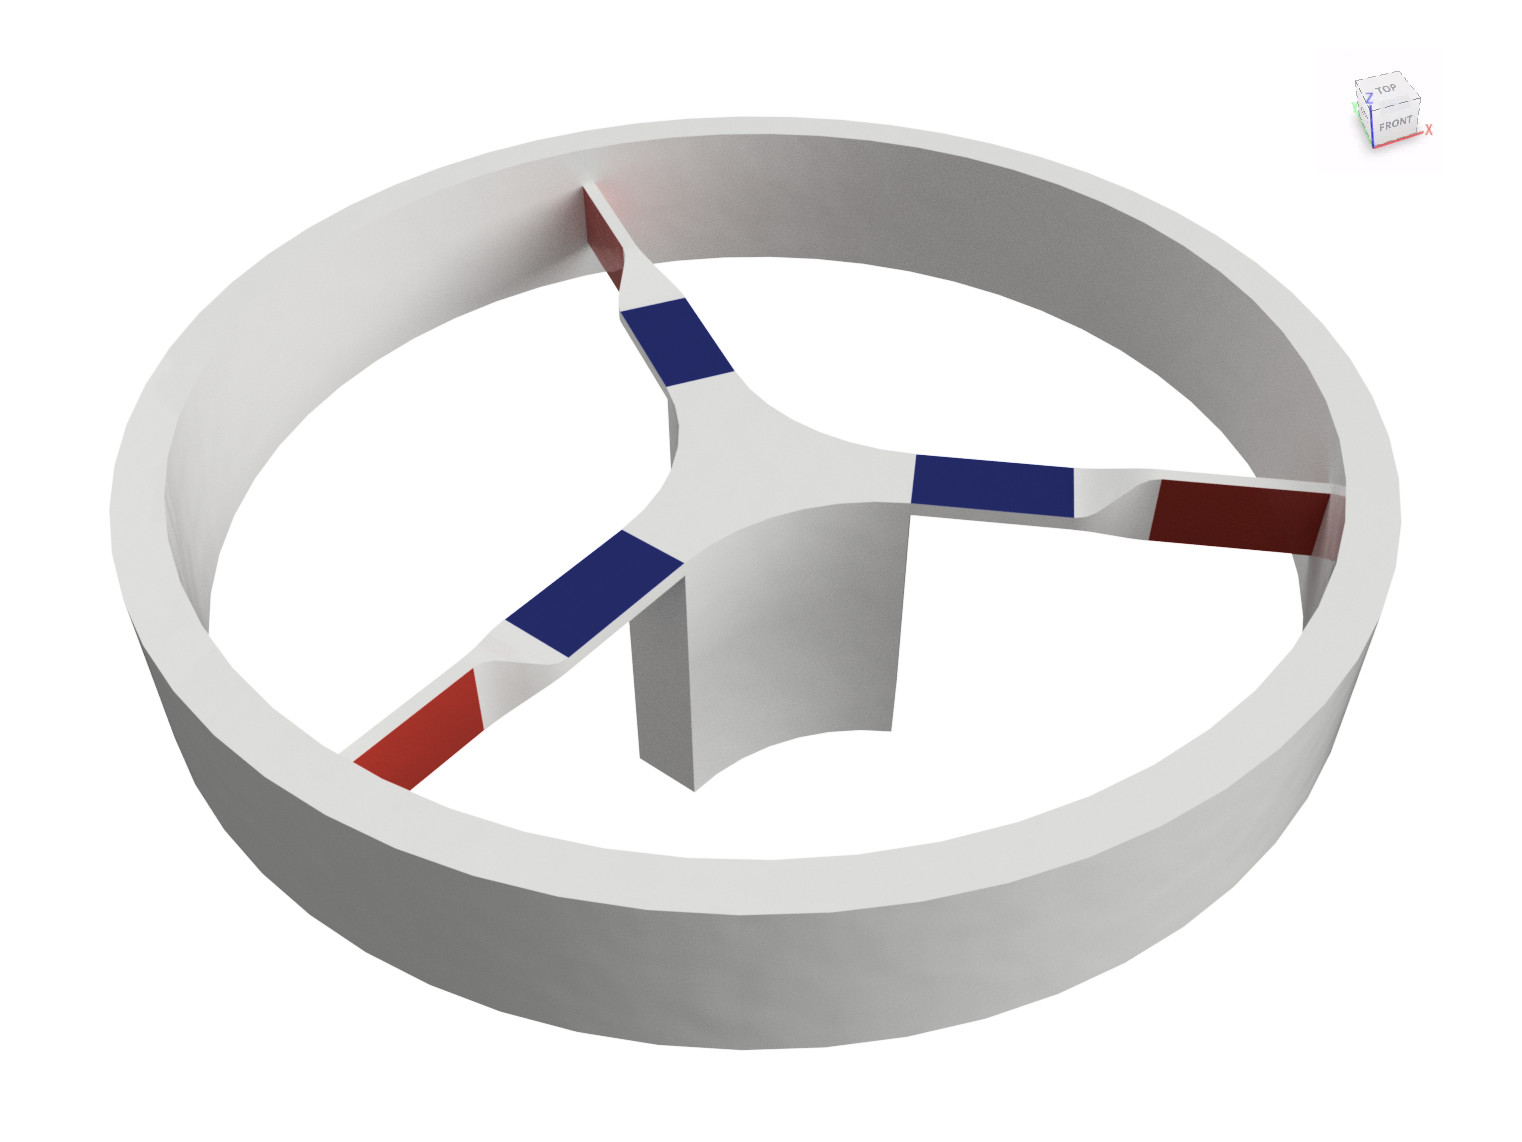 A 3D rendering showing a central pedestal with three twisted arms coming out at regularly spaced 120° angles. The arms connect to an outer ring which is the area the user would manipulate. The horizontal planar section of the twisted arms is coloured blue, and the vertical planar sections coloured red.